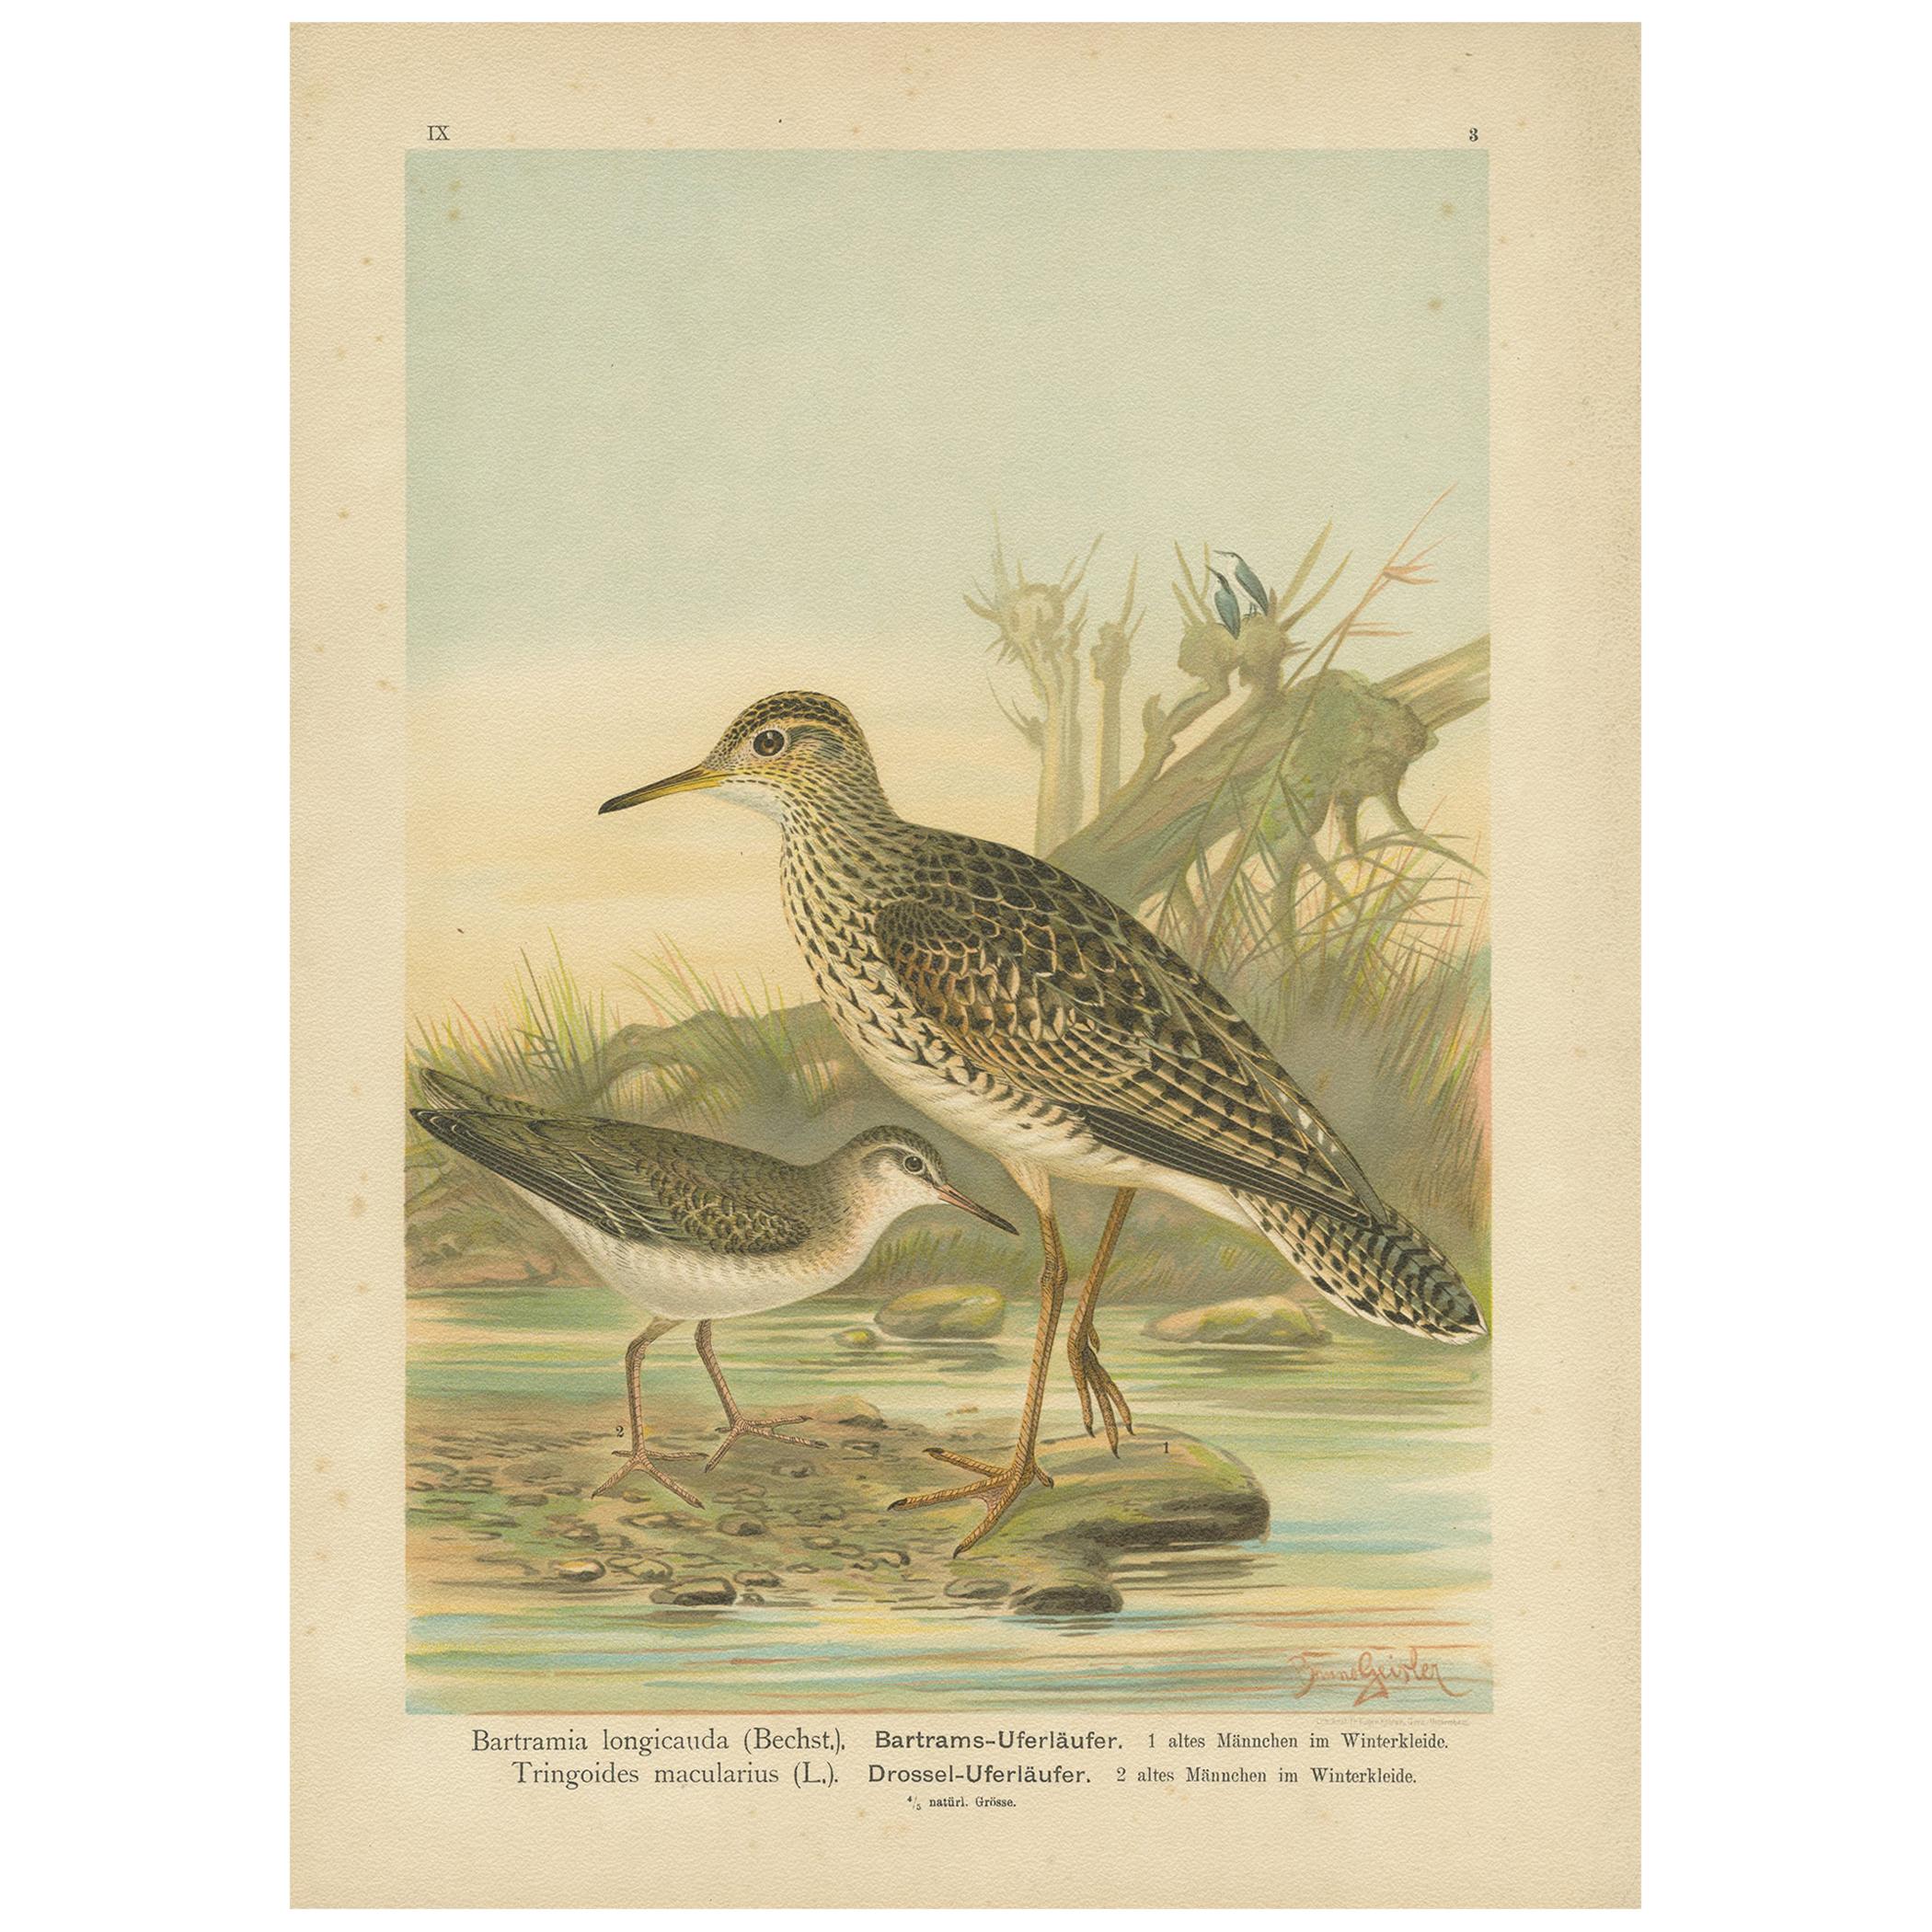 Antique Bird Print of the Upland and Spotted Sandpiper by Naumann, circa 1895